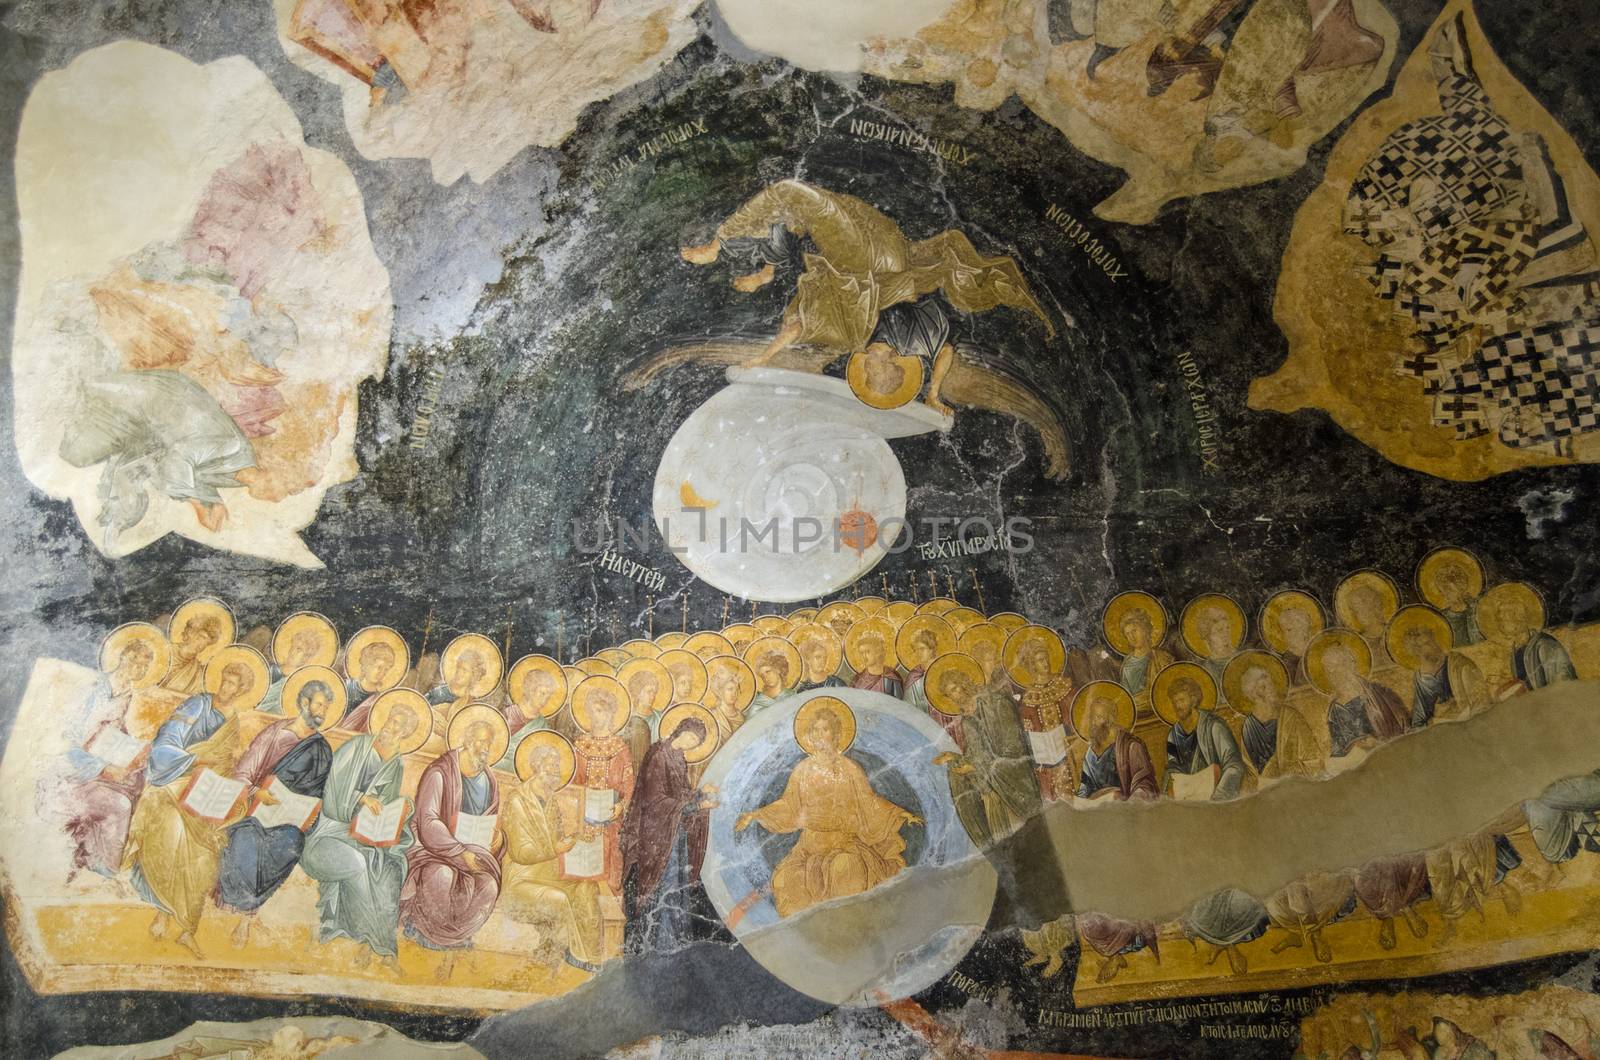 The Last Judgement scene.  Medieval Byzantine fresco on the ceiling of the Chora Church in Istanbul, Turkey.  Jesus Christ sits with Mary and John the Baptist with Apostles and angels surrounding them.  Paradise is represented by a snail shell carried by an angel.